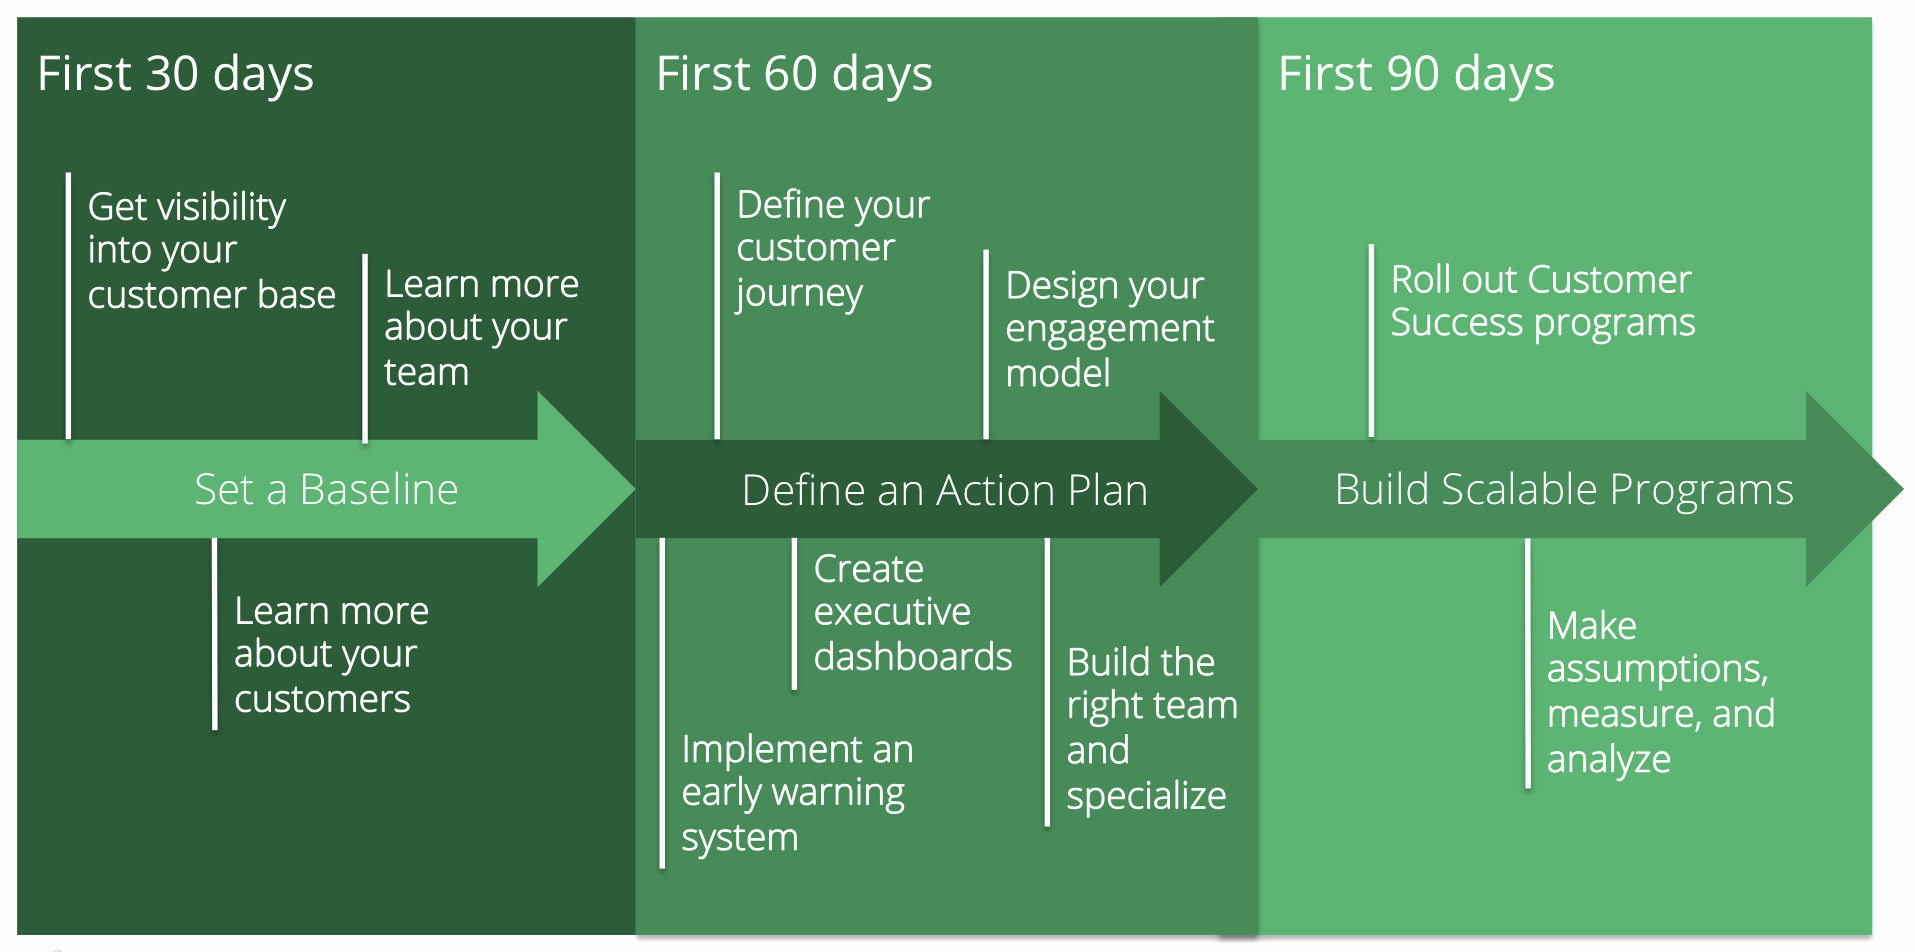 90 Day Onboarding Plan Template Fresh 90 Days Business Plan Examples